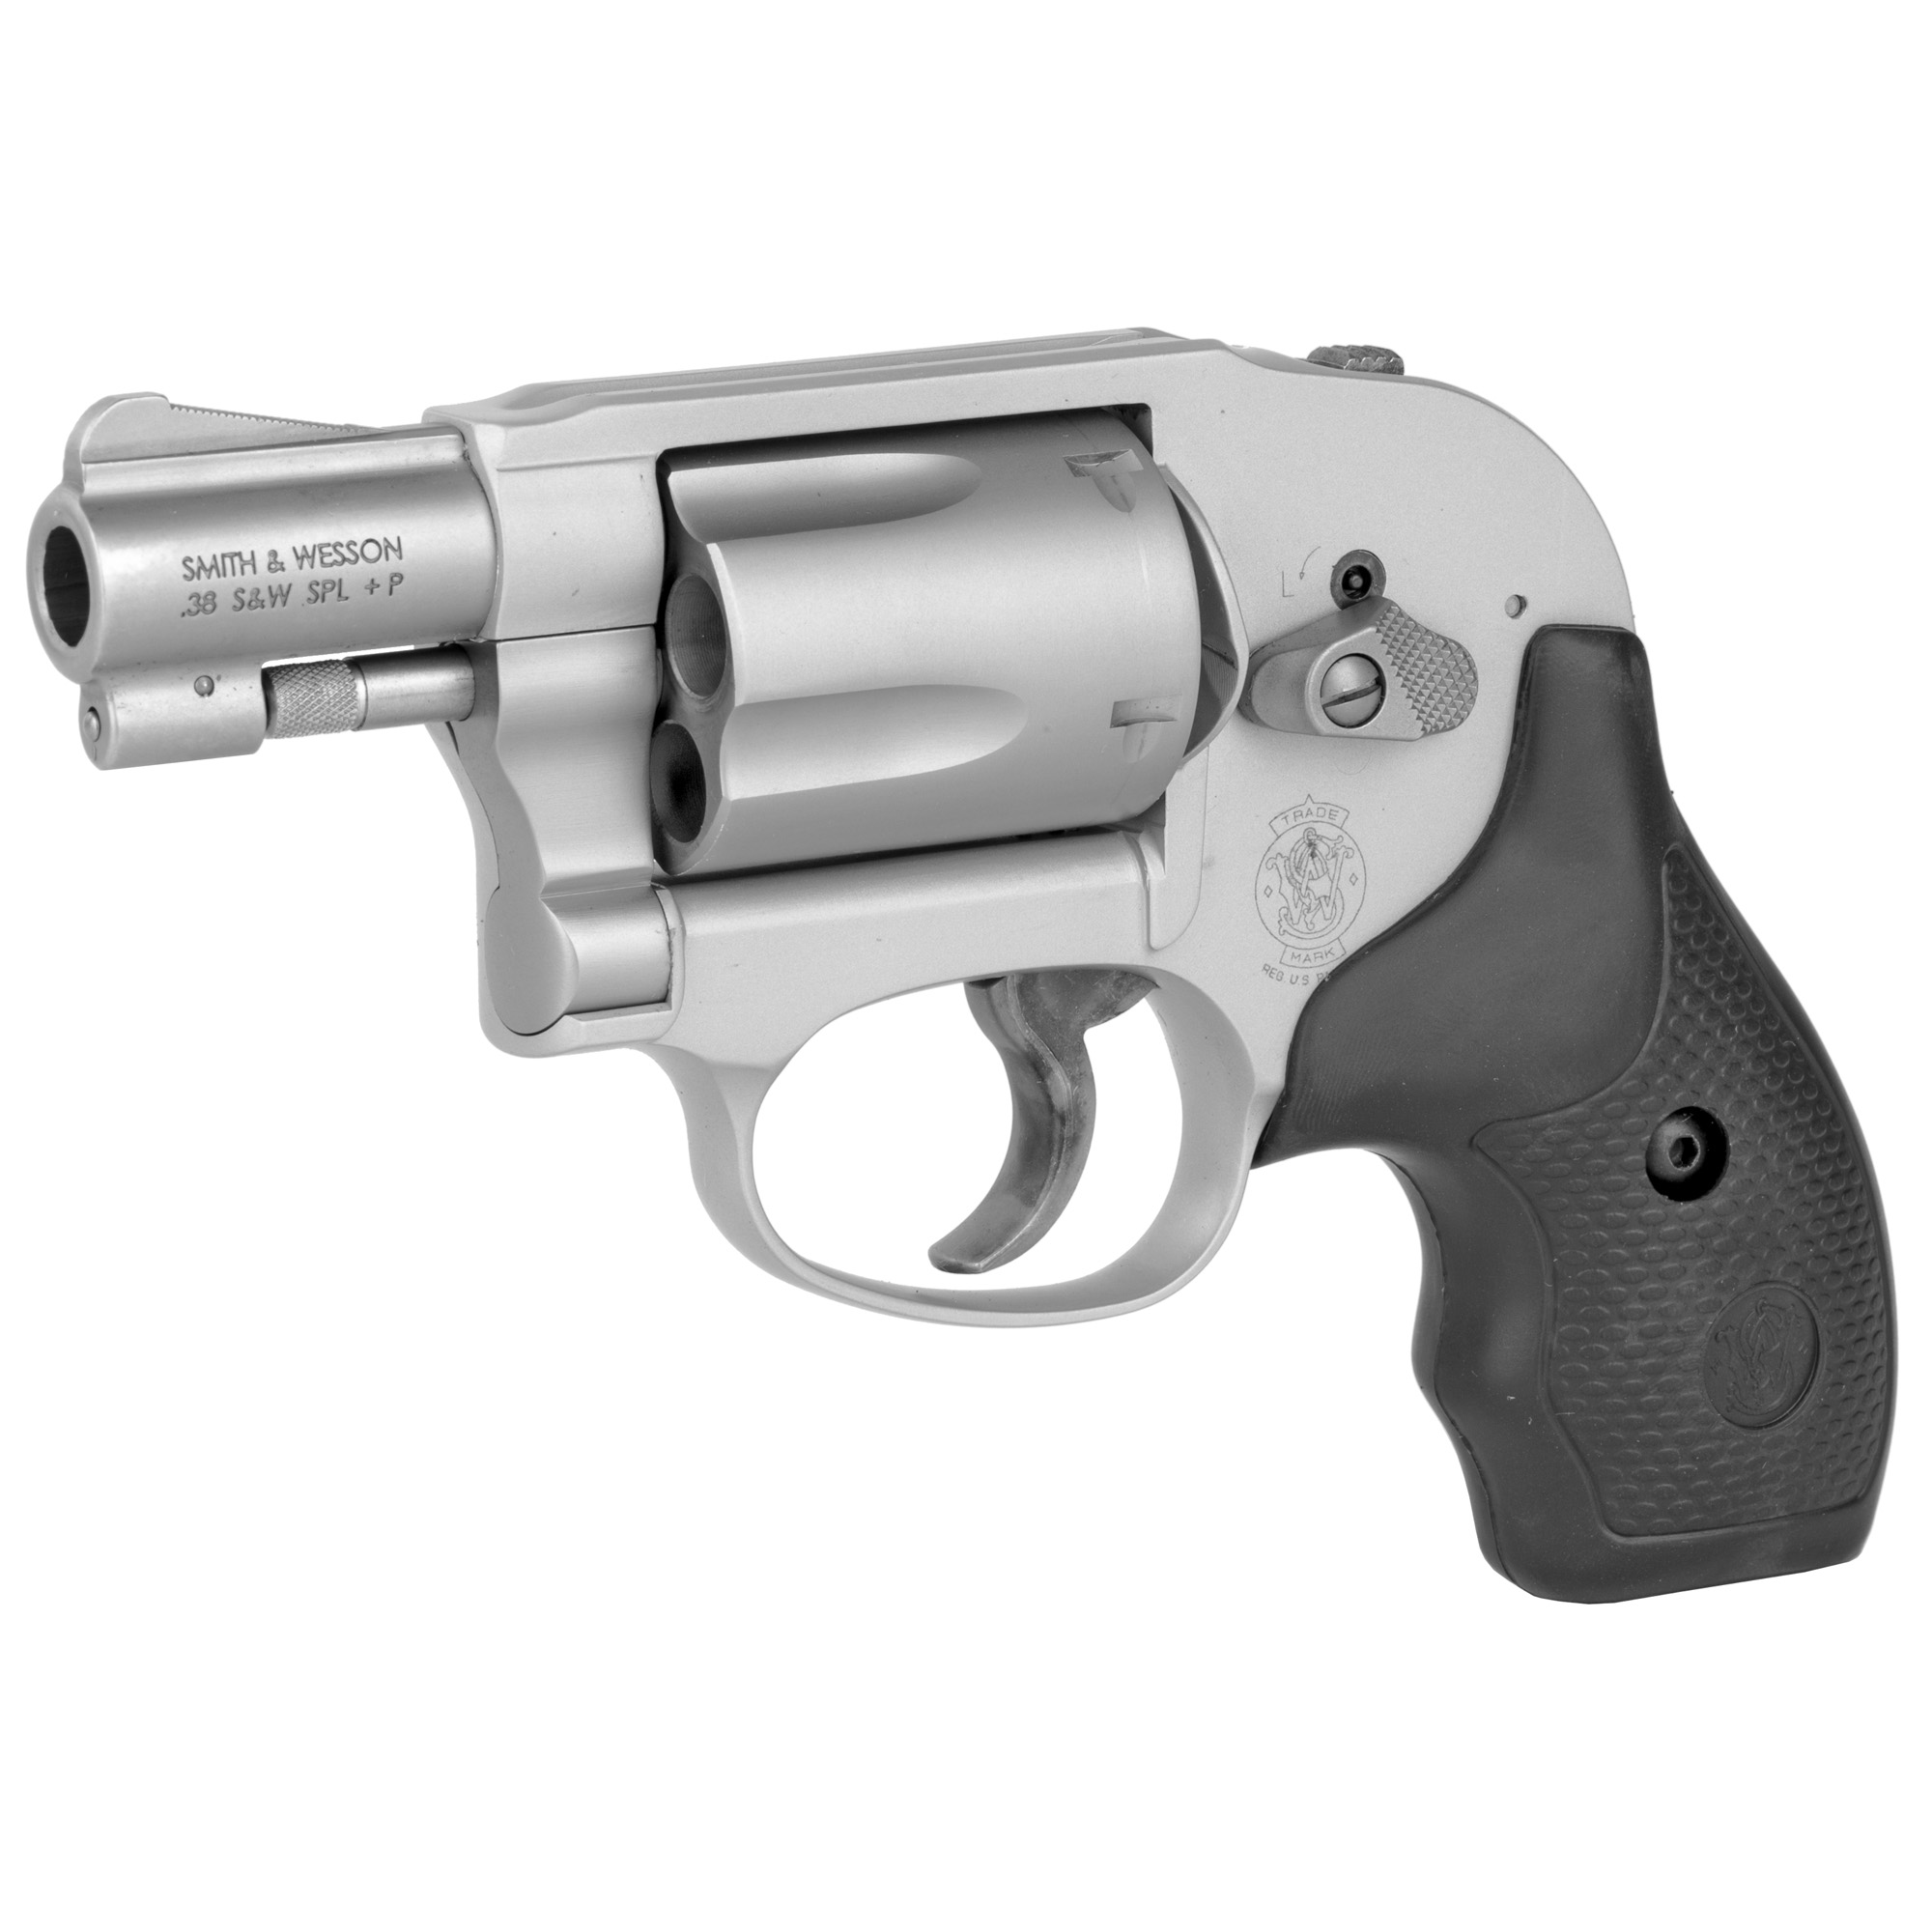 Smith & Wesson, Model 638, Double Action, Metal Frame Revolver, J-Frame, 38 Special, 1.875" Barrel, Aluminum Alloy, Matte Finish, Silver, Rubber Grips, Fixed Sights, 5 Rounds